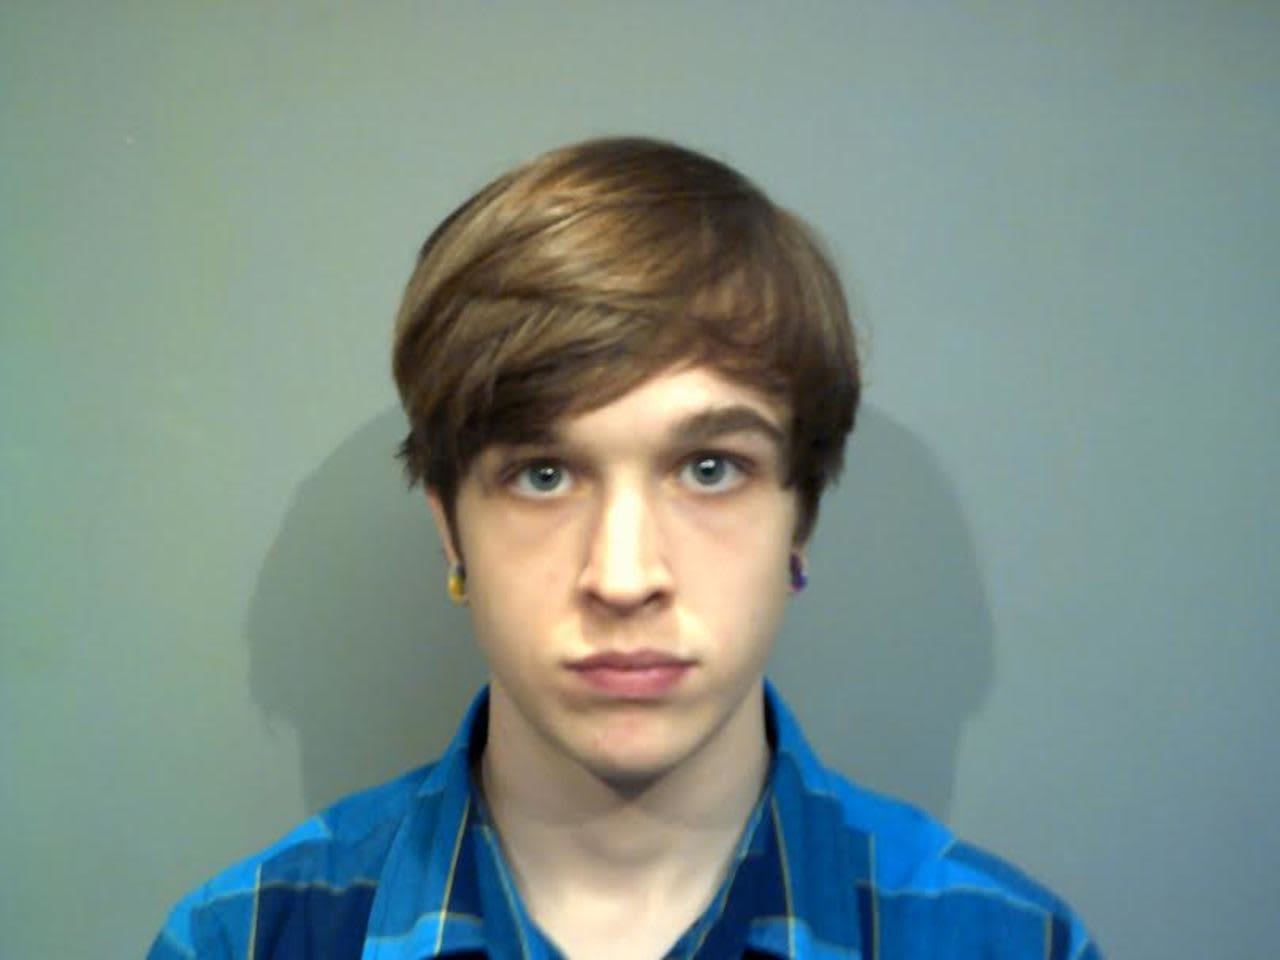 Sean Taylor Morkys, 20, of Waterbury is charged with first-degree threatening and inciting injury to a person or property after posting tweets threatening a Donald Trump rally in Waterbury.